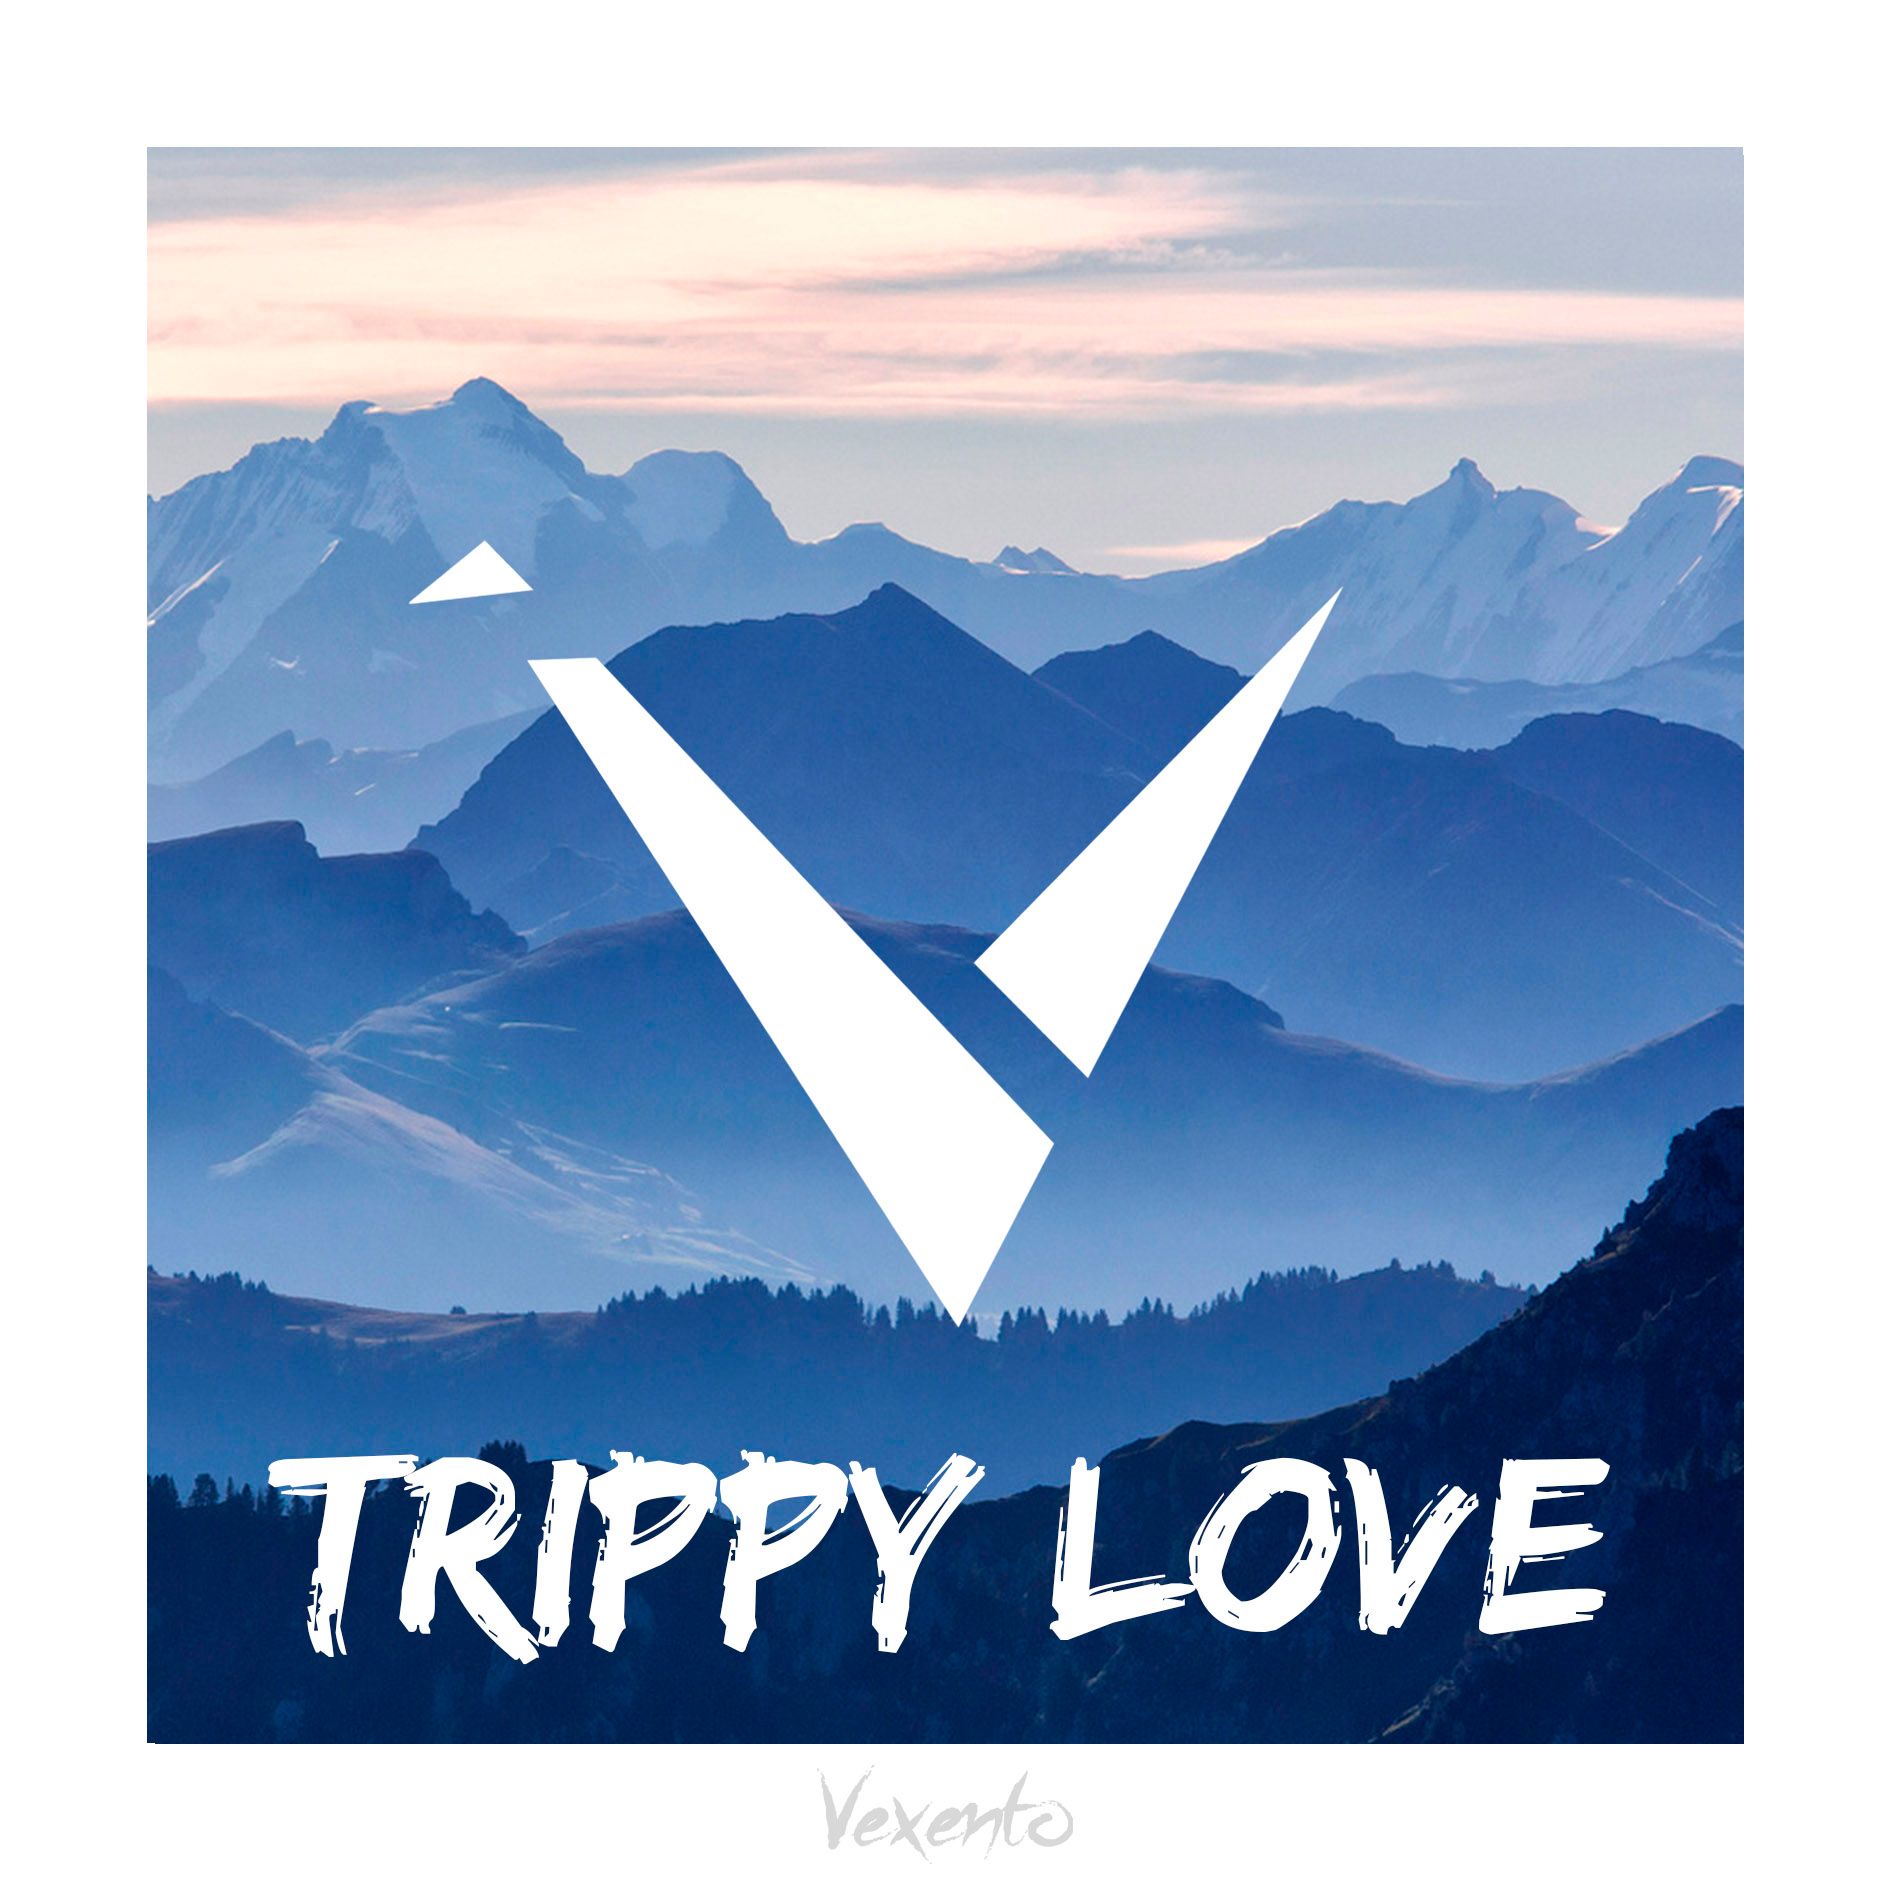 I-download Vexento - Trippy Love